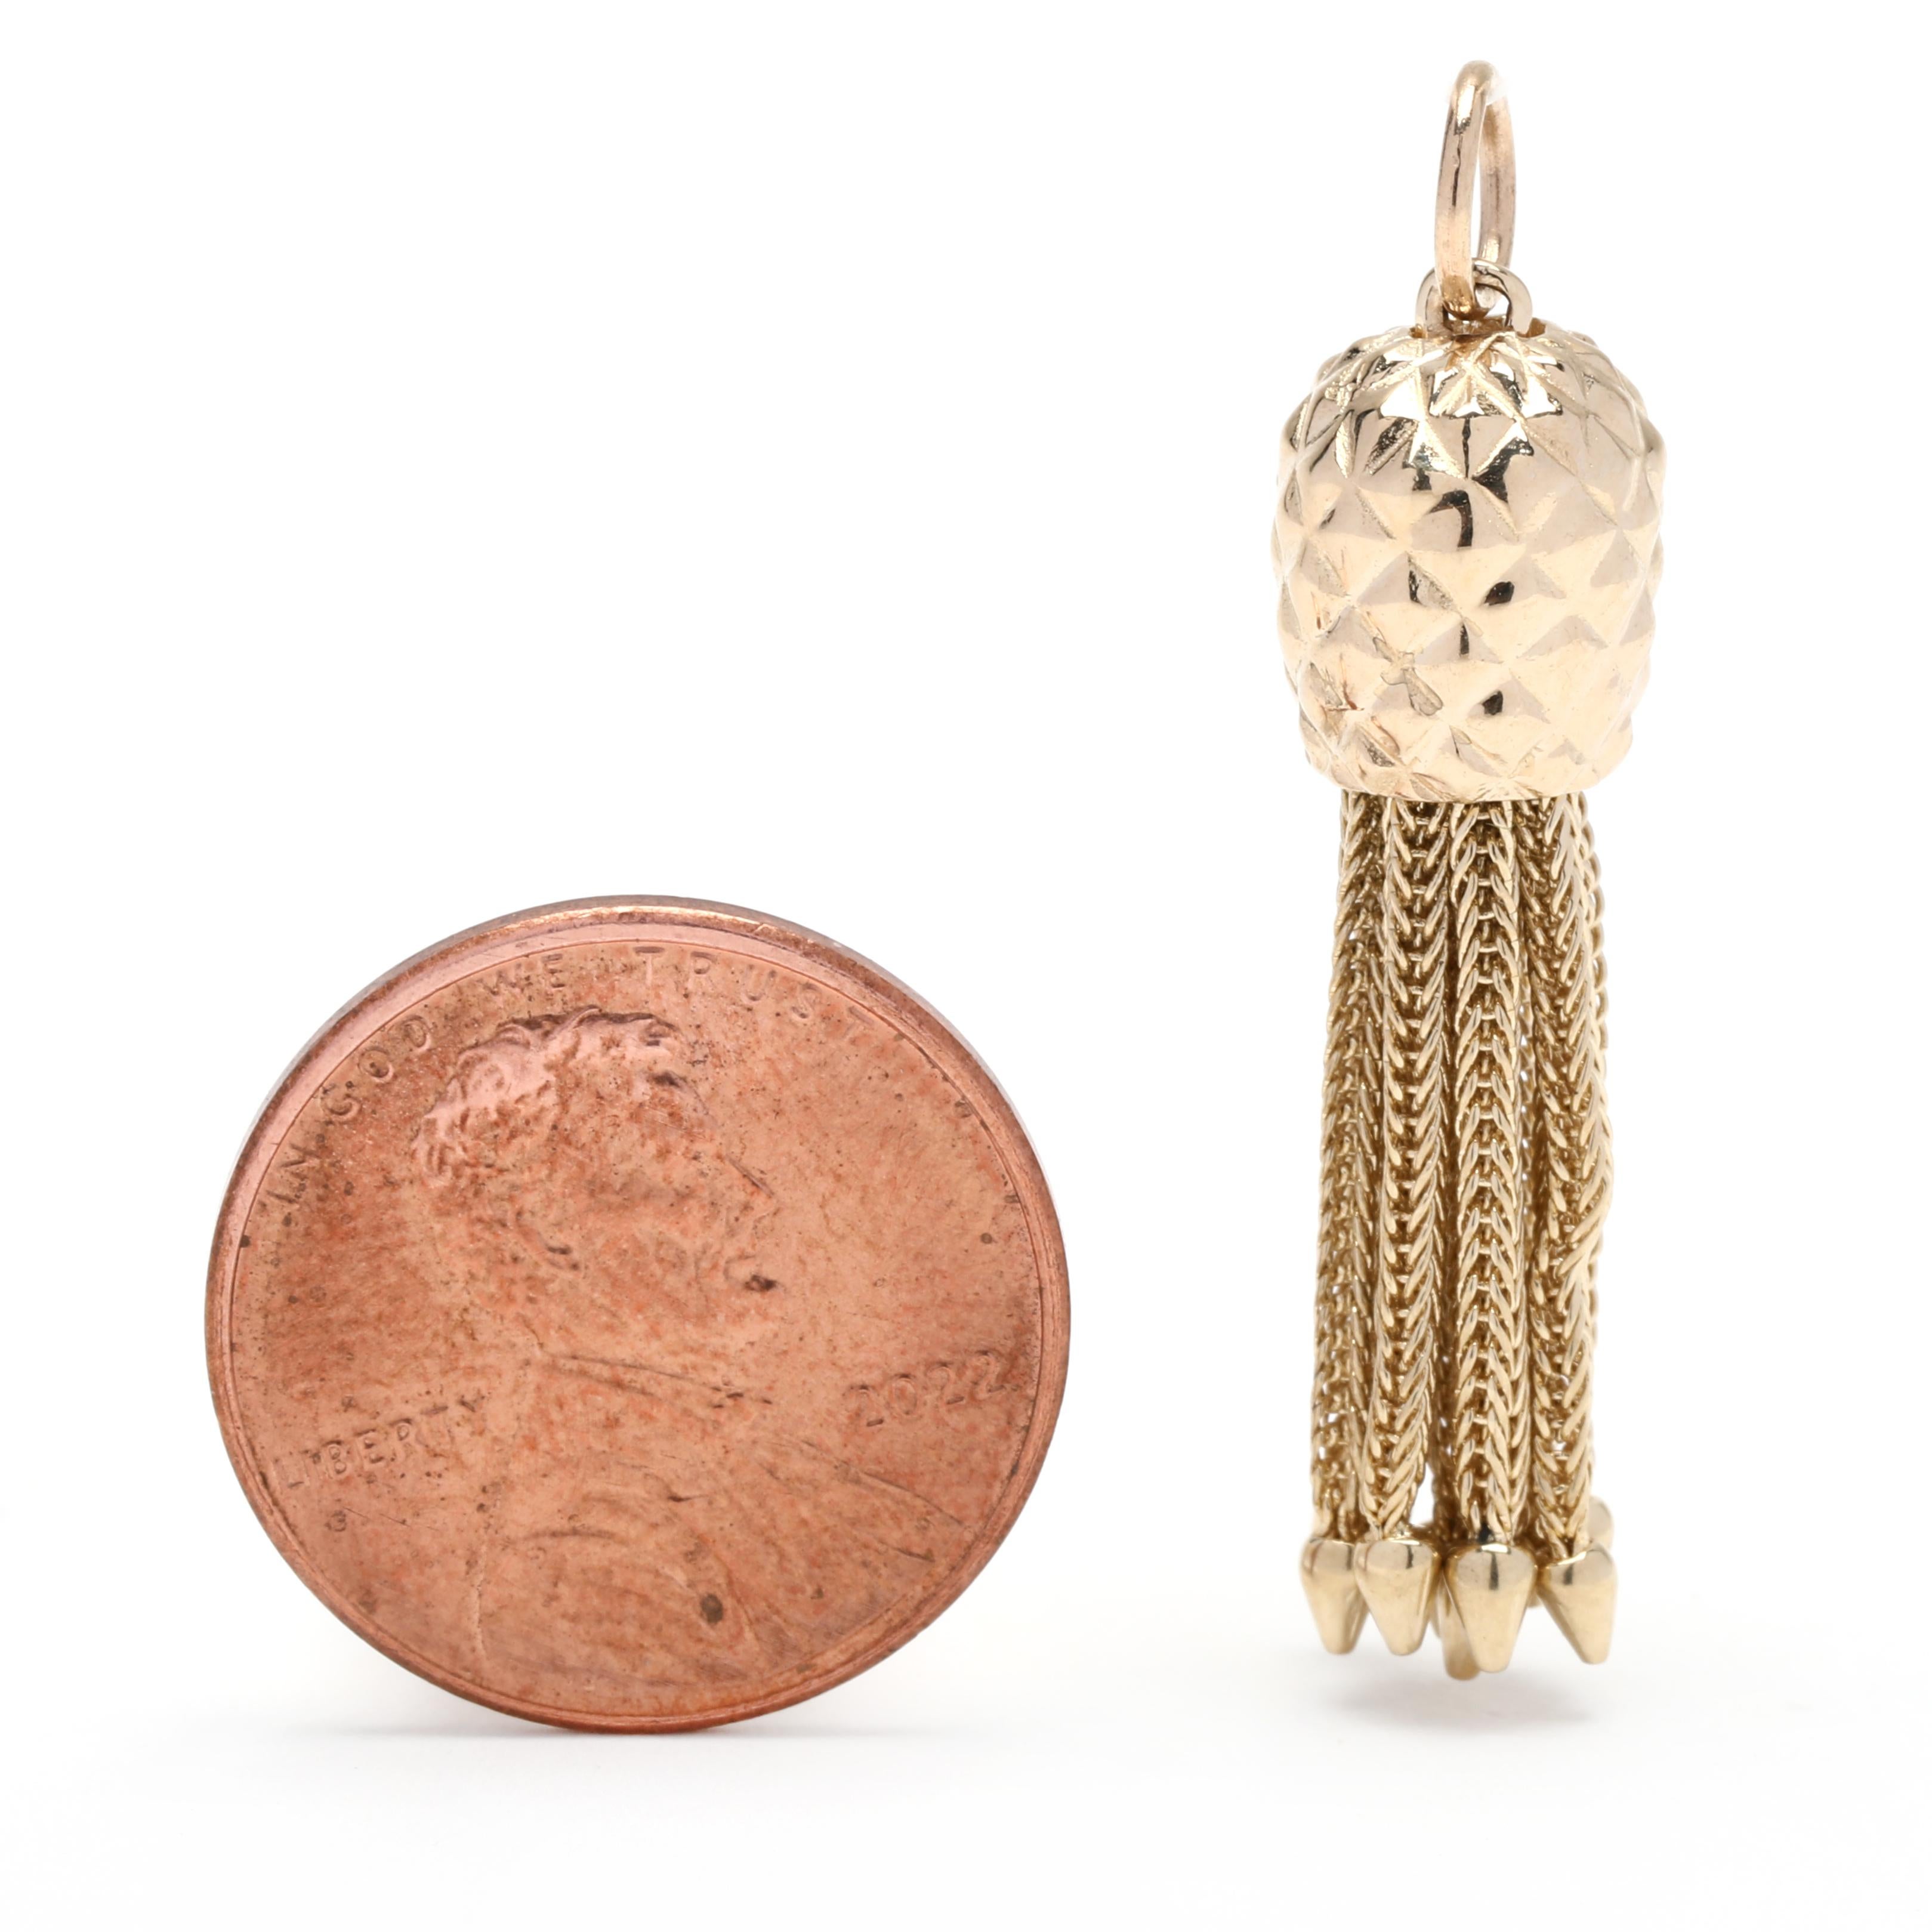 This 14K yellow gold acorn tassel charm is the perfect addition to any outfit! Its intricate design features a unique acorn-shaped charm with a delicate tassel, all crafted with quality 14K yellow gold. The pendant hangs from a medium-length chain,